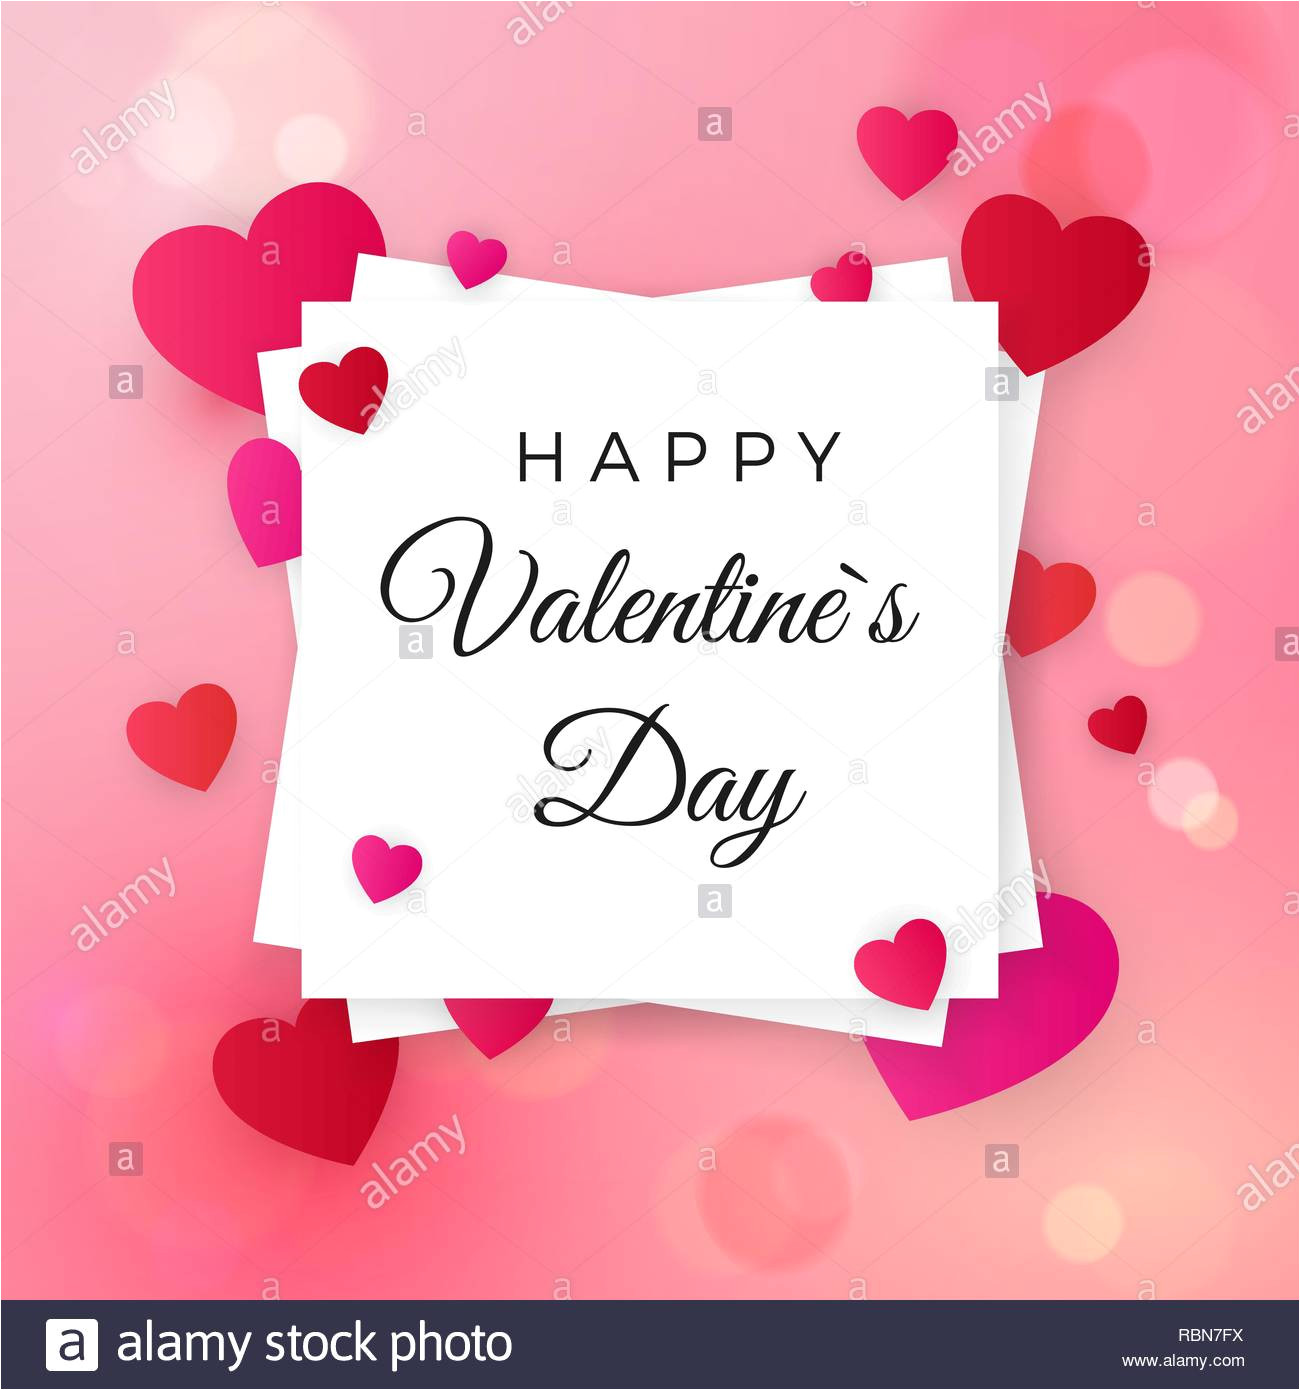 happy valentines day and wedding design elements greeting text on white label on pink background with hearts be my valentine greeting card vector i rbn7fx jpg